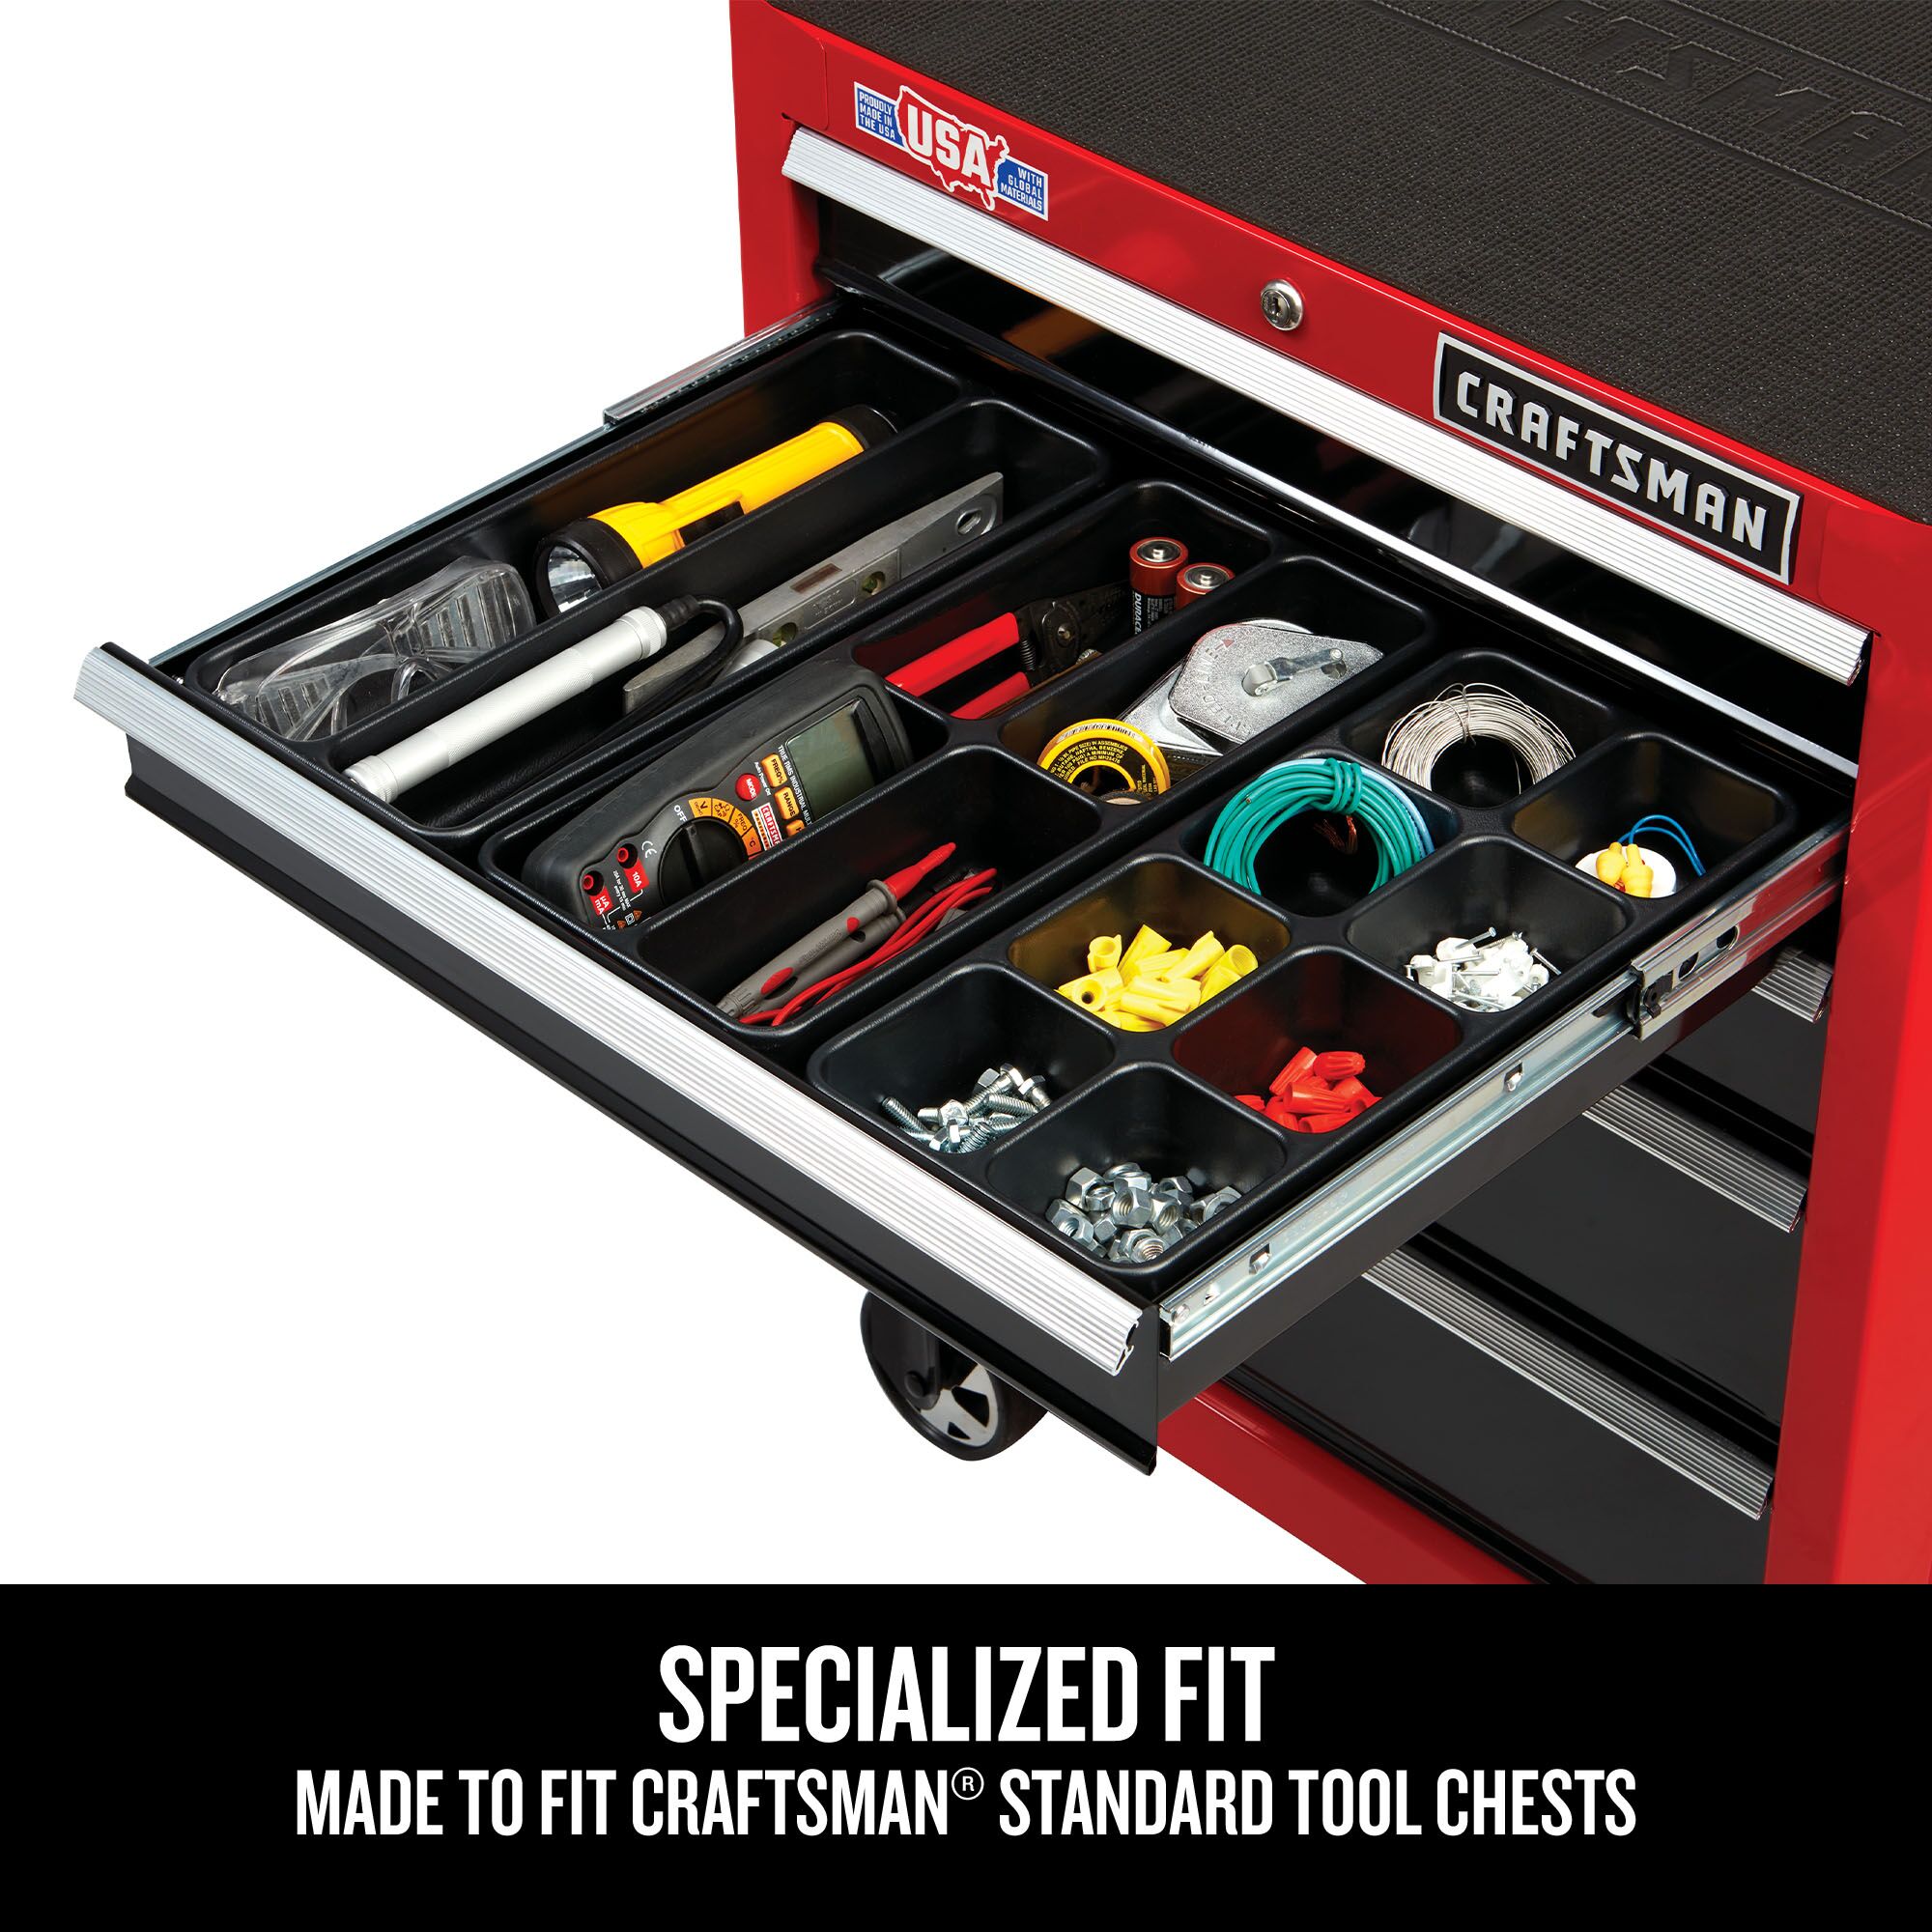 Specialized fit - made to fit CRAFTSMAN® standard tool chests